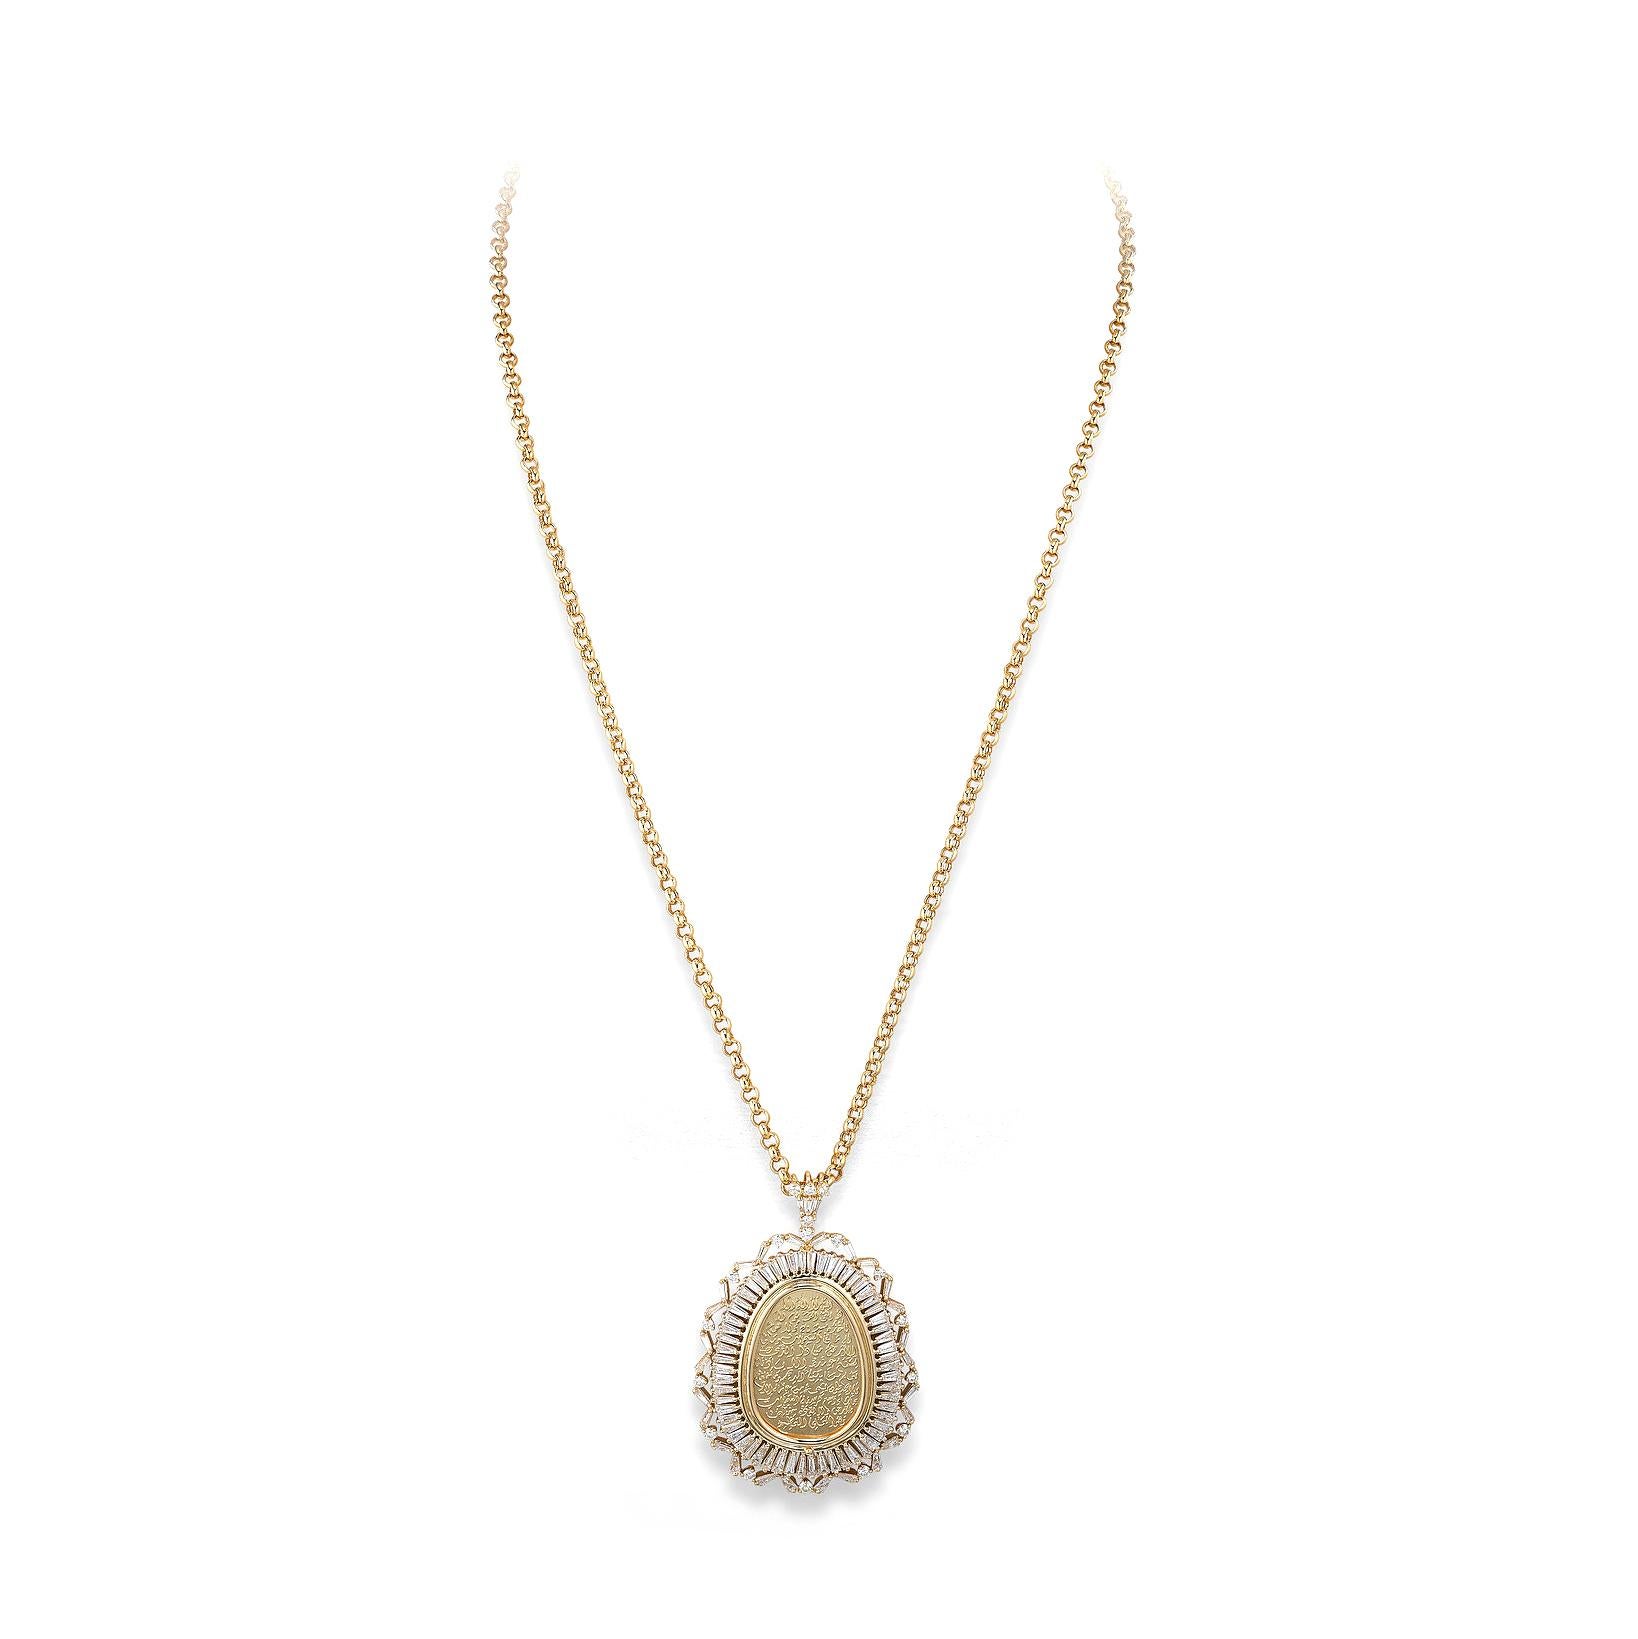 Sourate pendant in 18kt yellow gold set with 18 diamonds 0.83 cts and 89 tapers cut diamonds 6.10 cts         